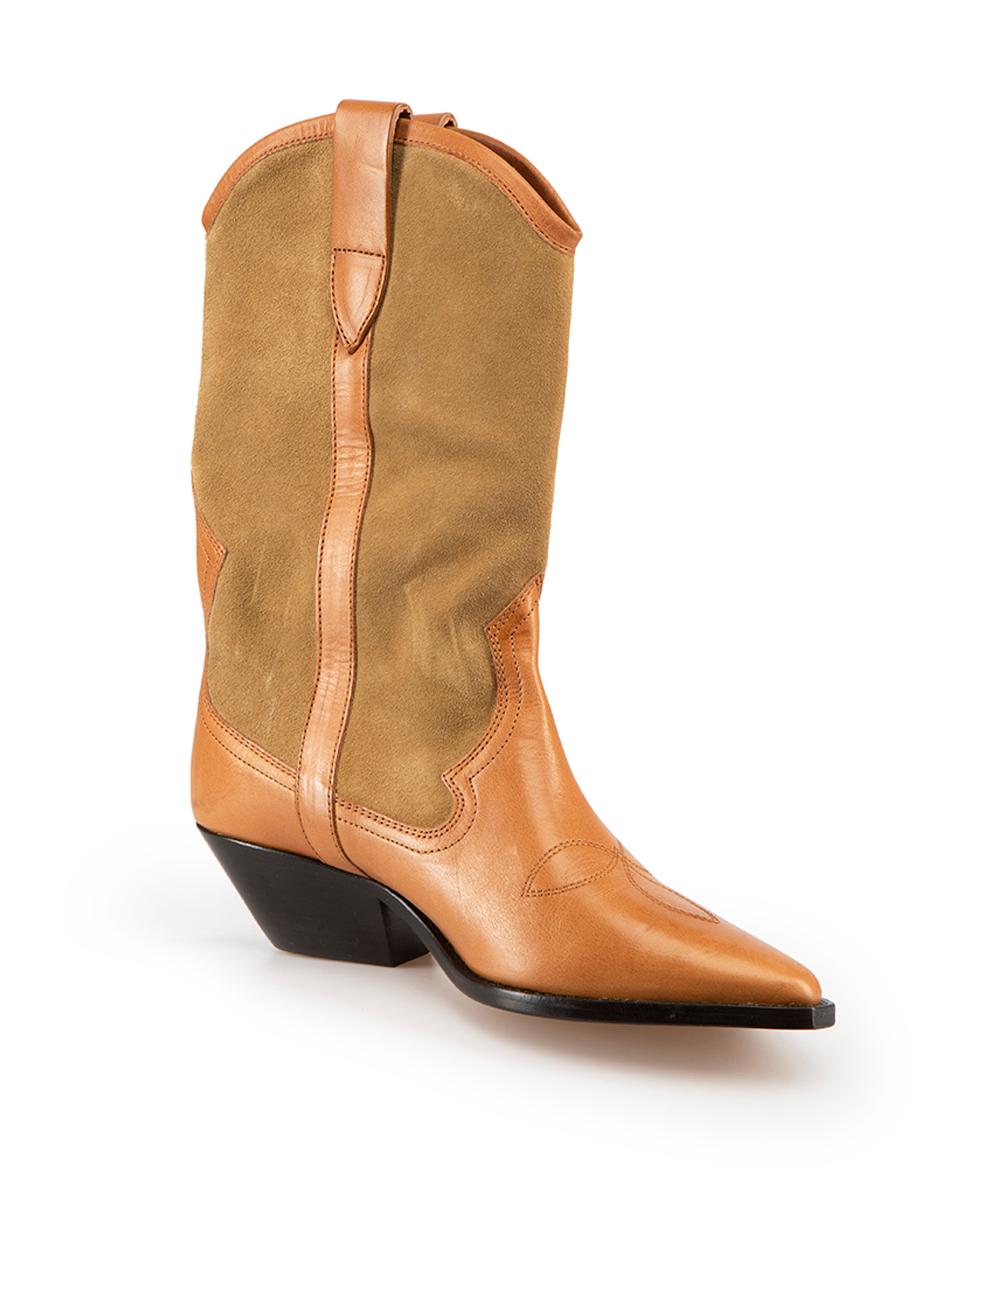 CONDITION is Very good. Minimal wear to boots is evident. Minimal wear to uppers with a handful of light scuff marks seen throughout on this used Isabel Marant designer resale item.
 
 Details
 Brown
 Leather
 Cowboy boots
 Suede panels
 Point toe
